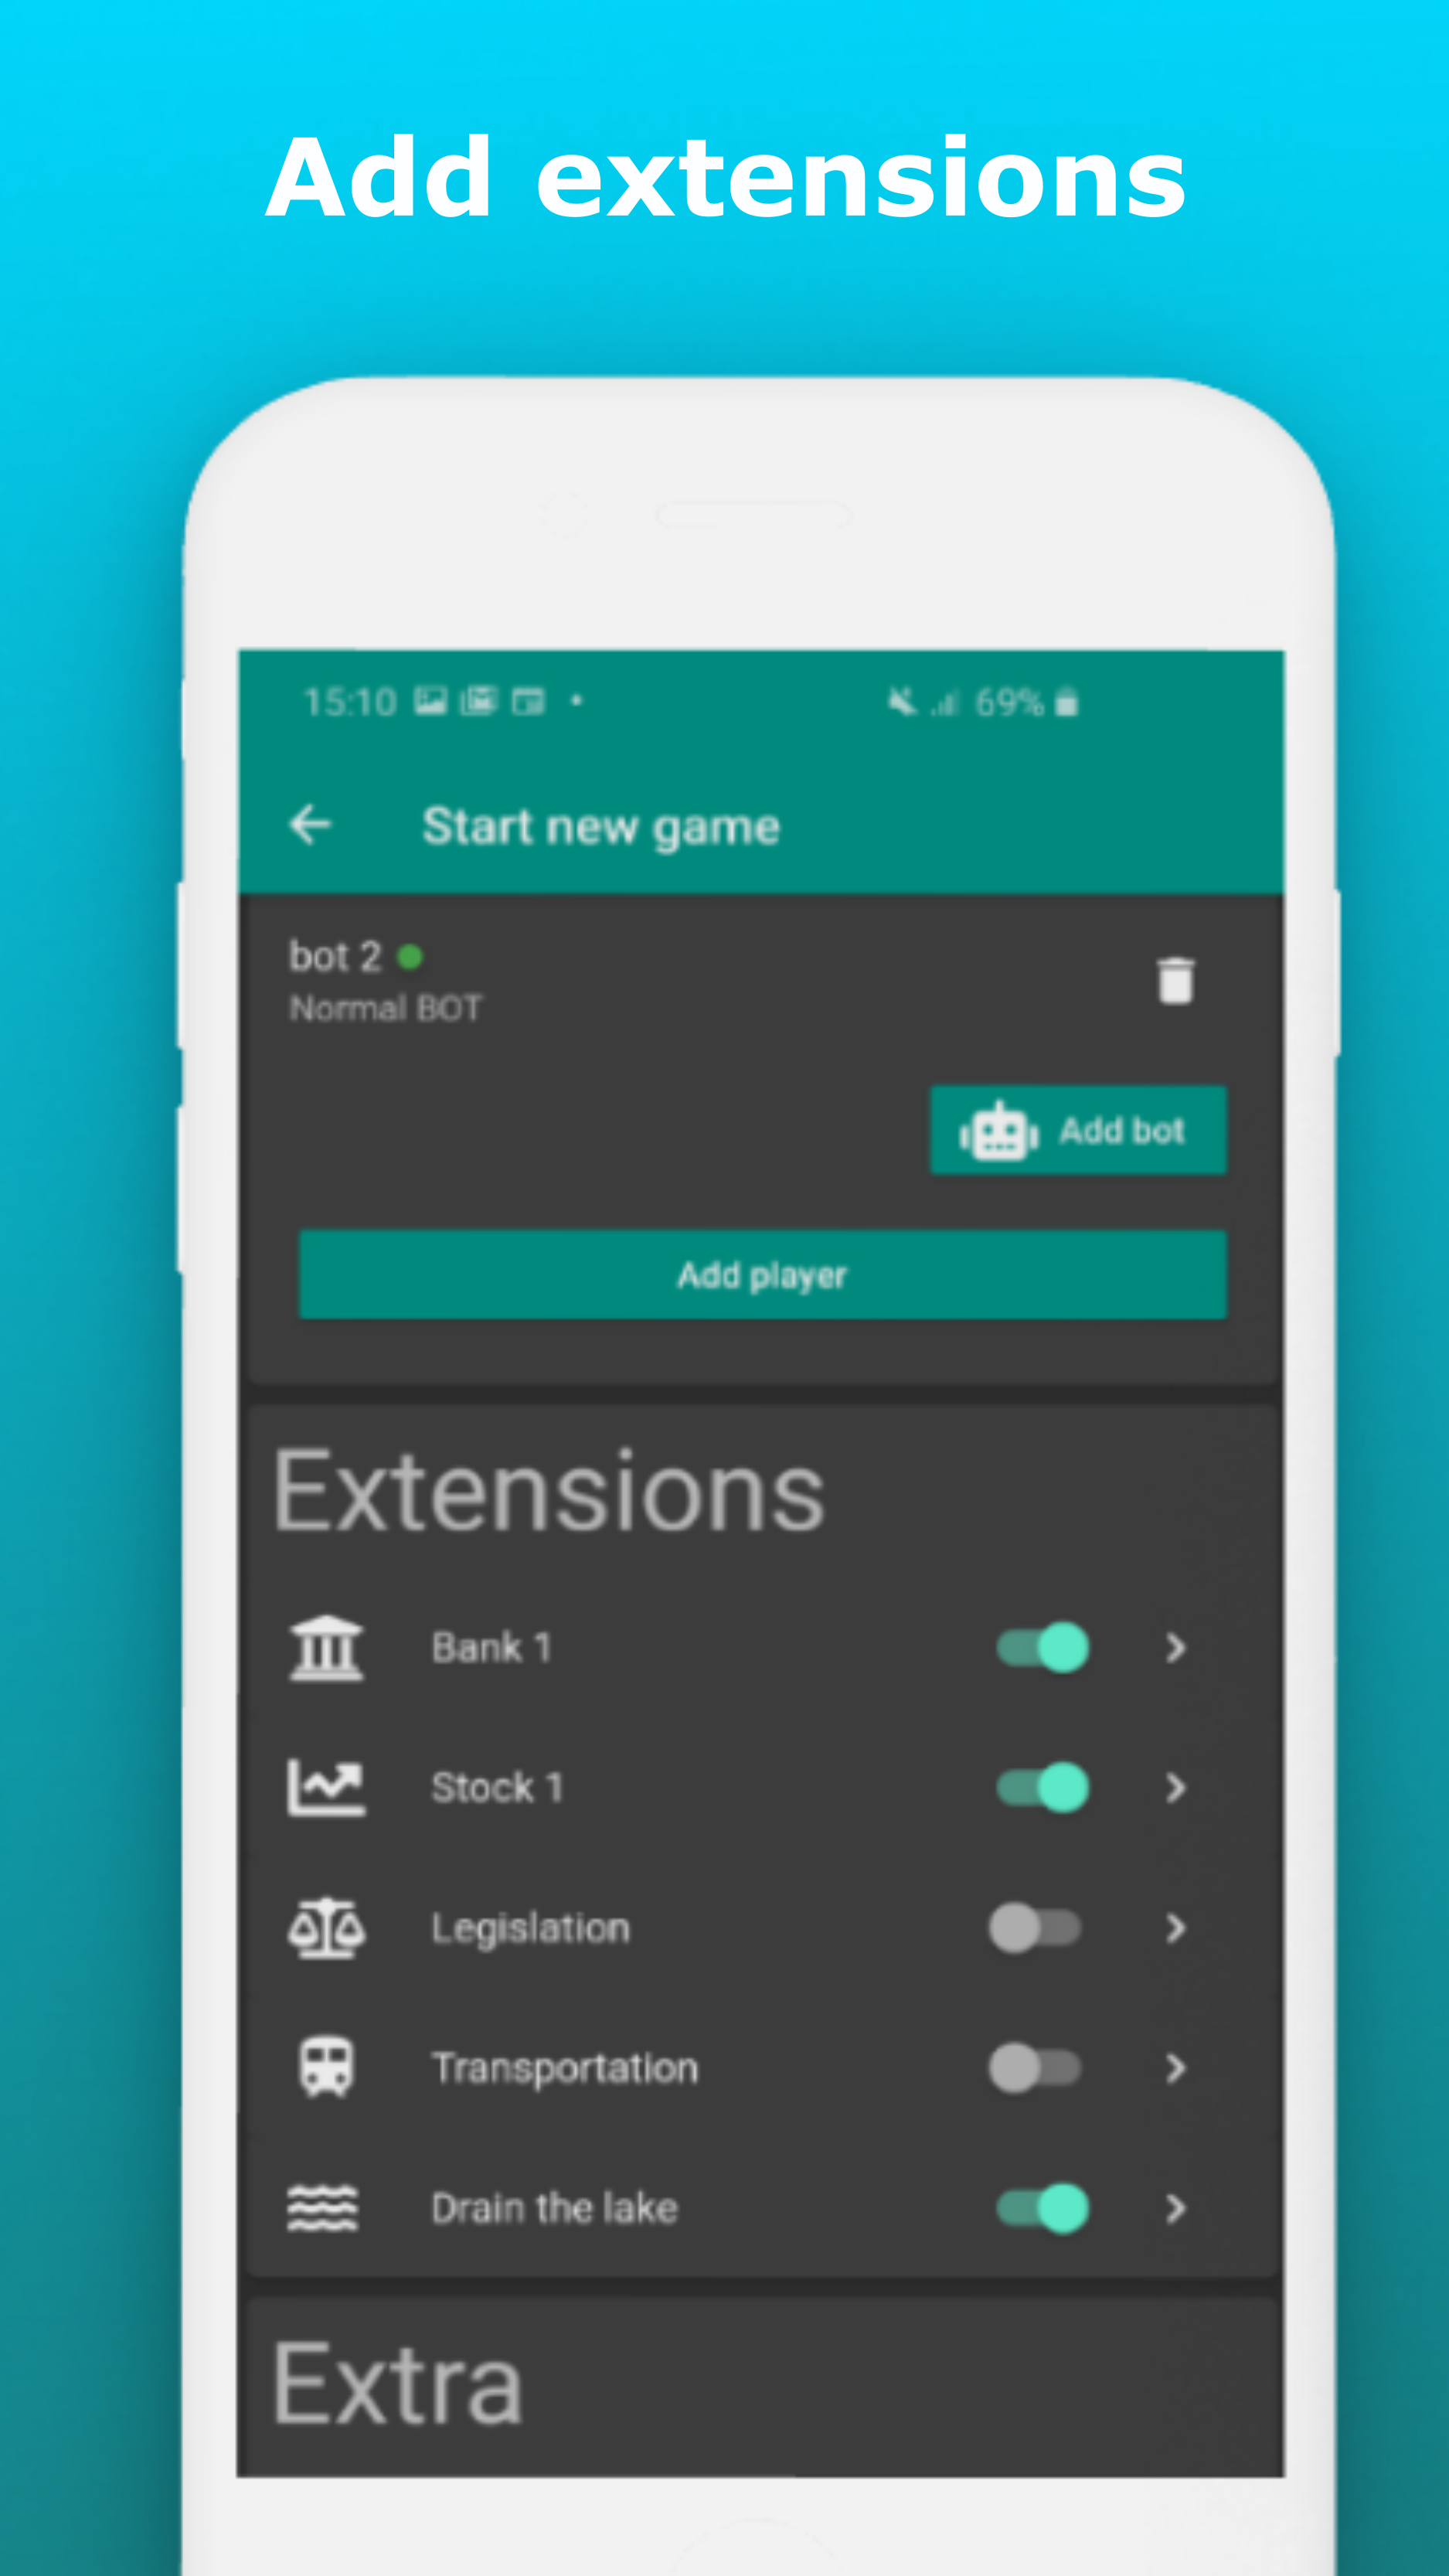 Extensions to improve your online game and make it better